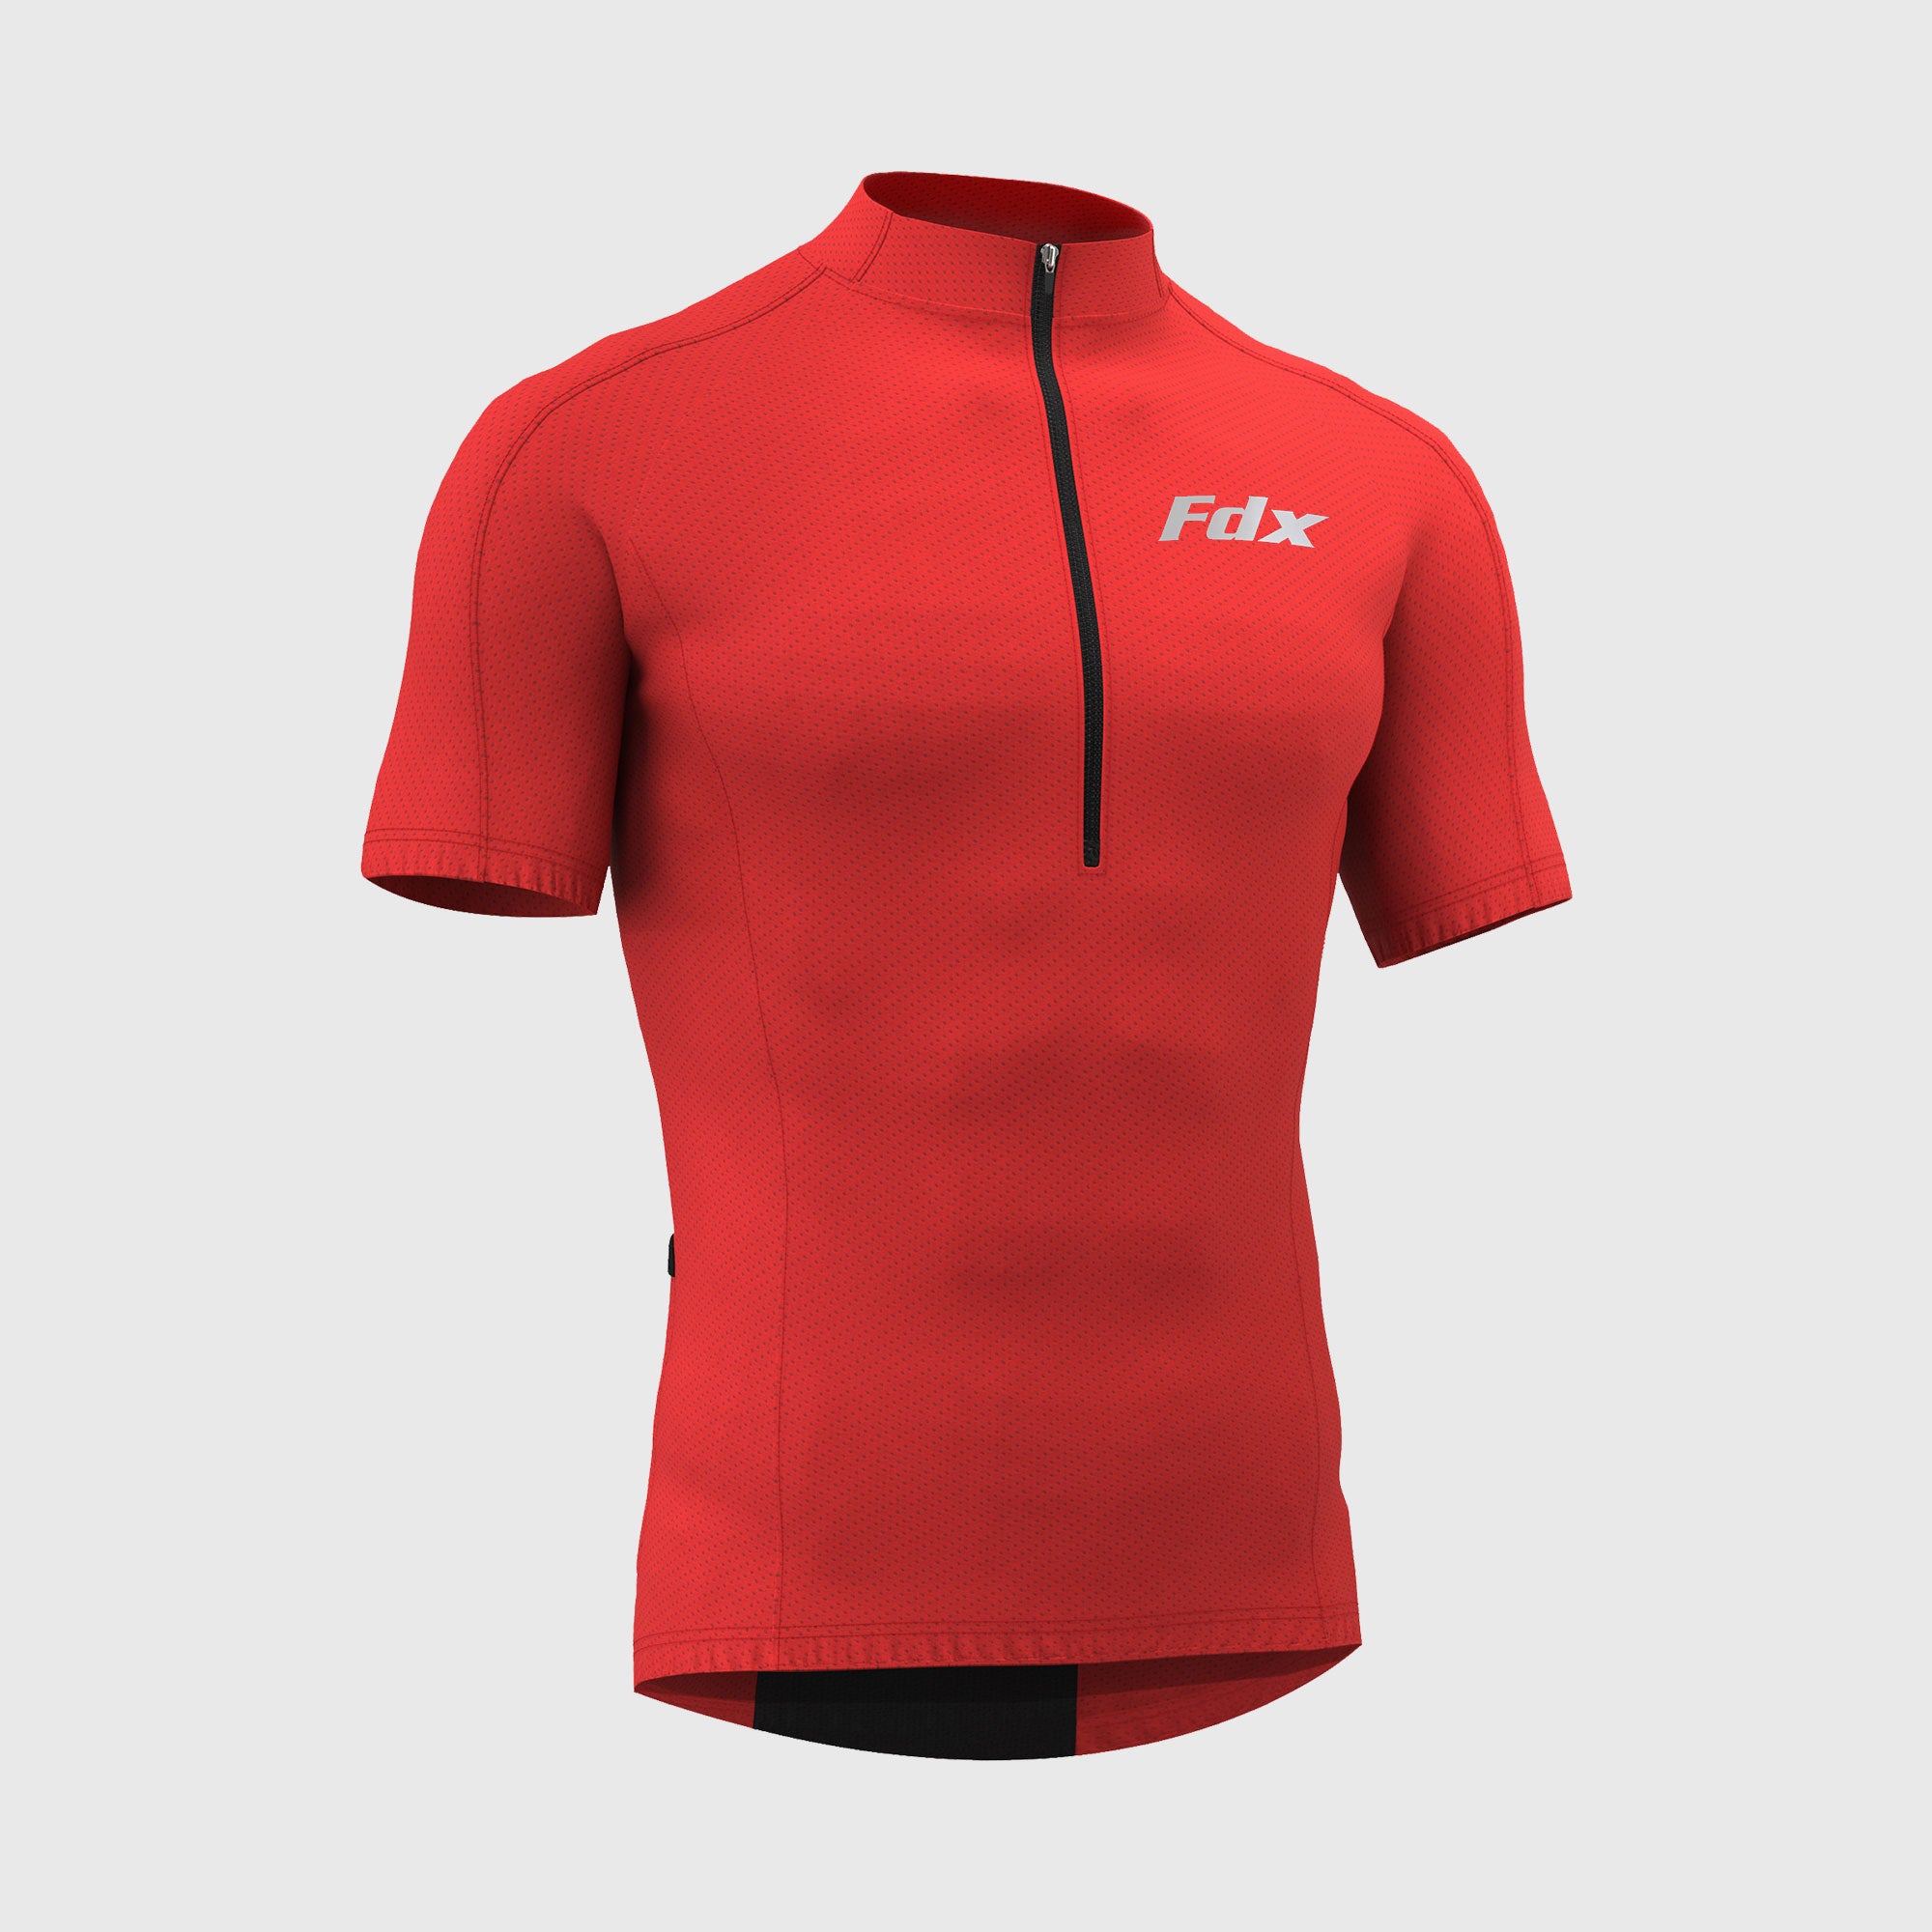  Fdx Red best short sleeves men’s cycling jersey breathable lightweight hi-viz Reflective details summer biking top, full zip skin friendly half sleeves mesh cycling shirt for indoor & outdoor riding with two back & 1 zip pockets